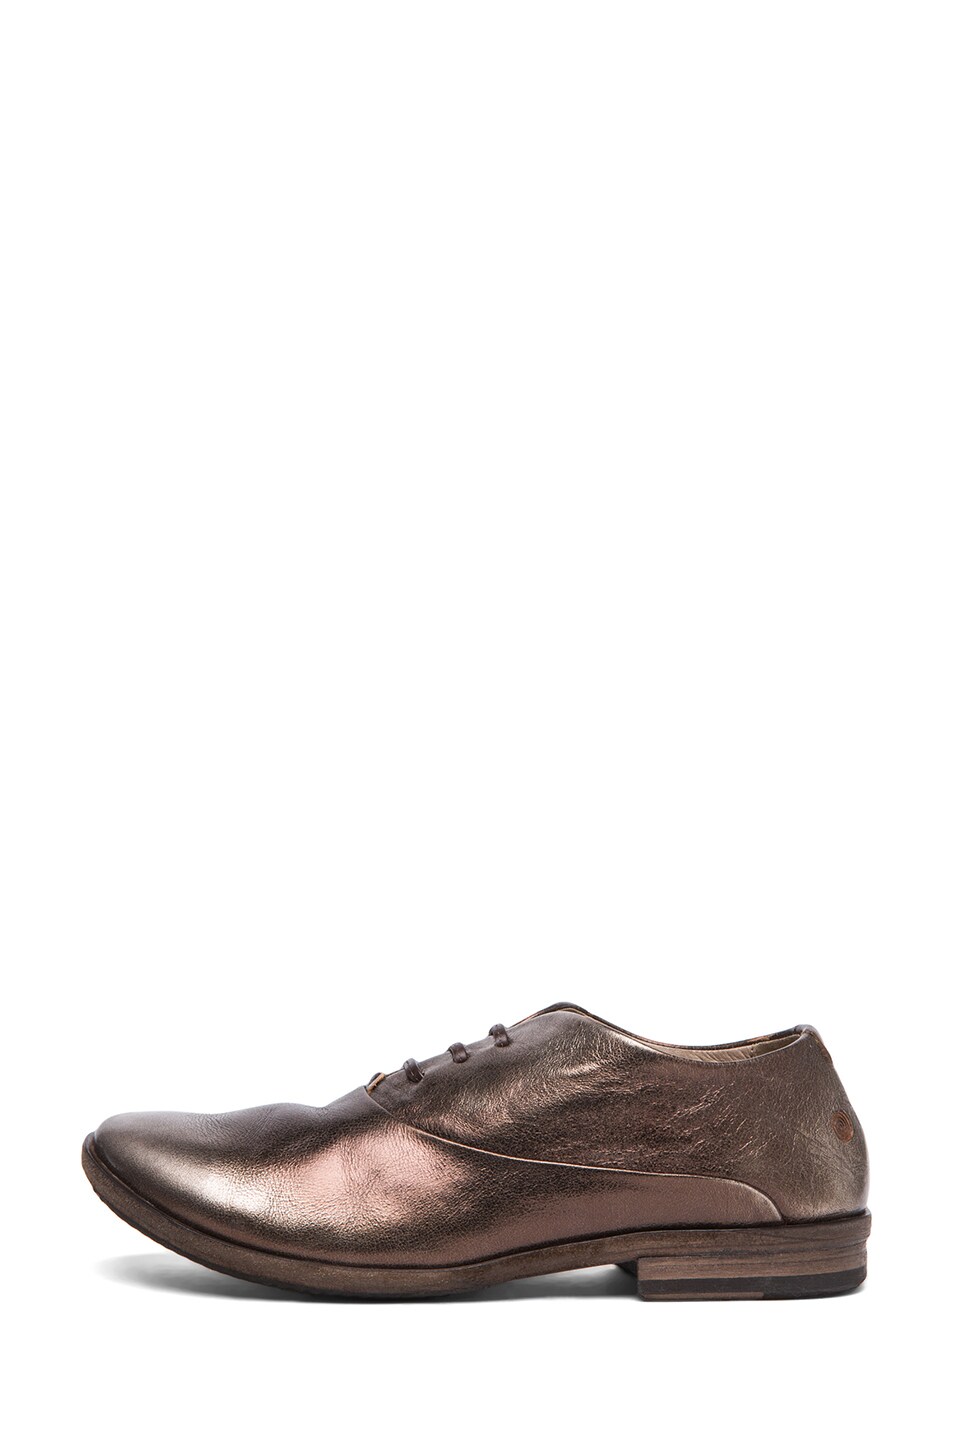 Image 1 of Marsell Se Metallic Leather Oxfords in Tobacco Metallic